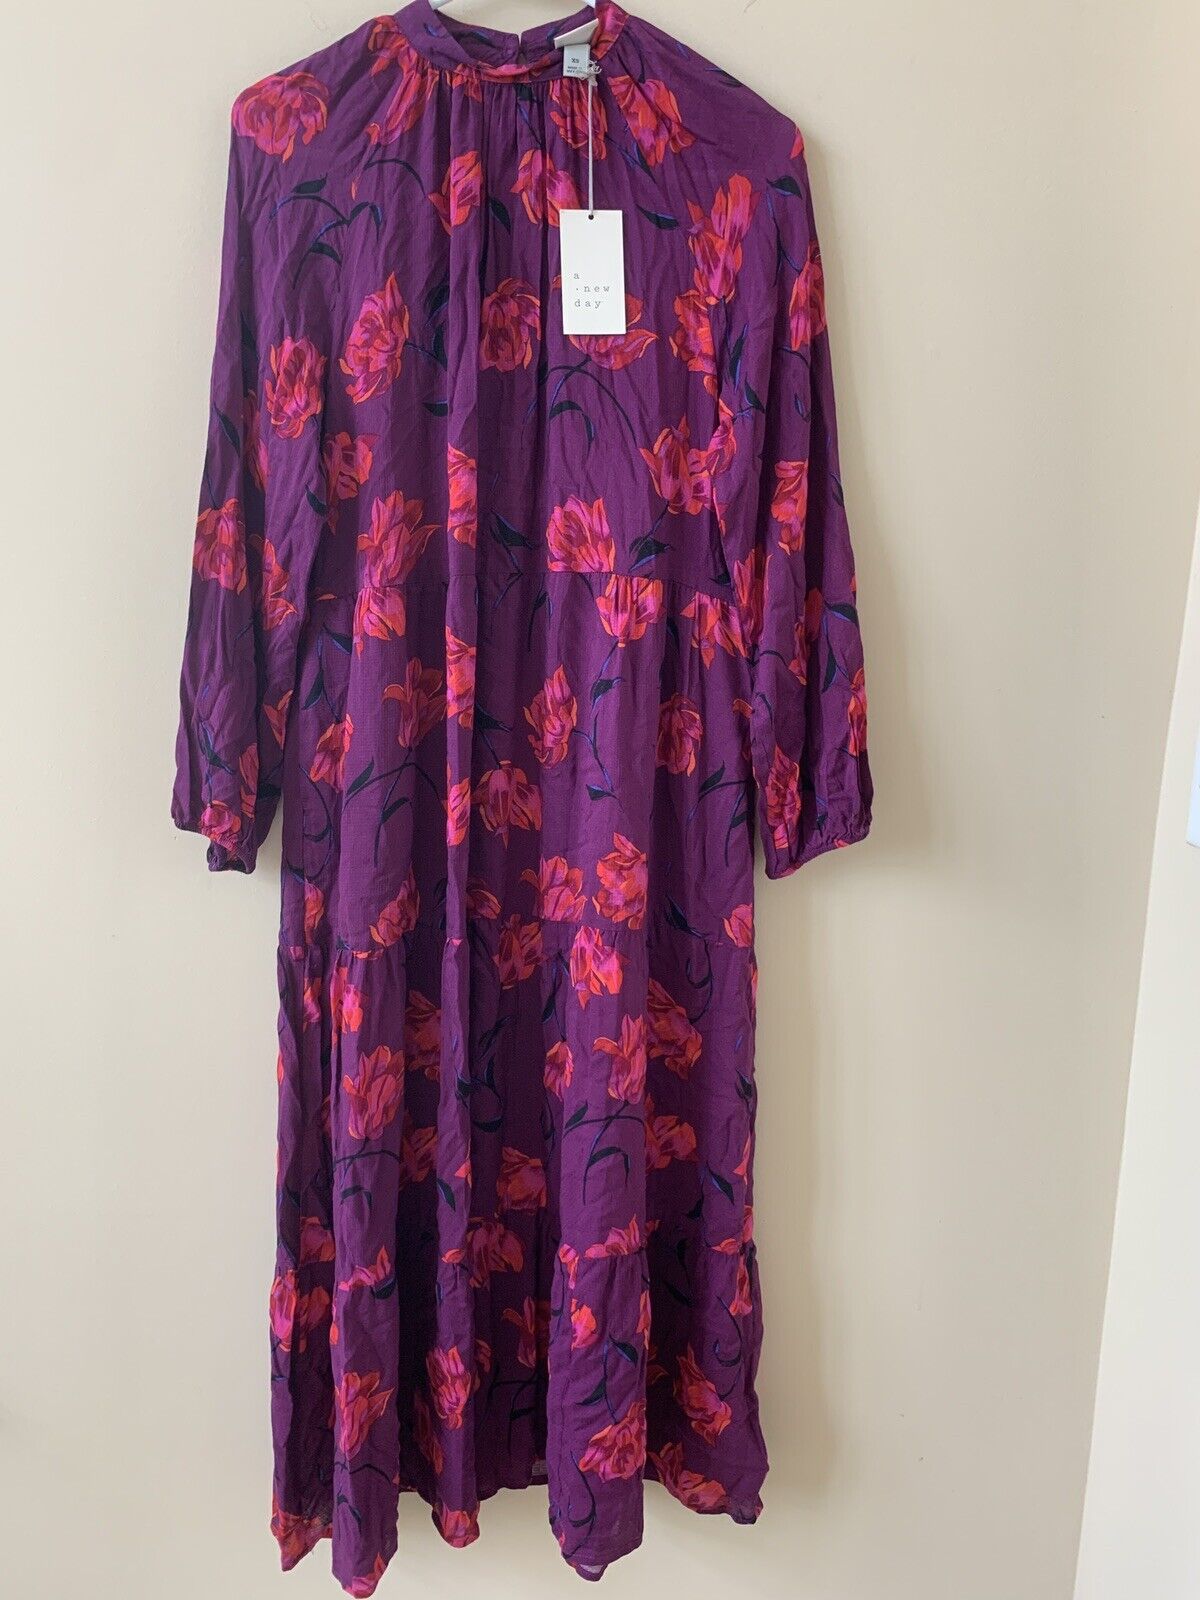 Women\'s Floral Print Long Sleeve Tiered Dress - A New Day Dark Purple Size Small